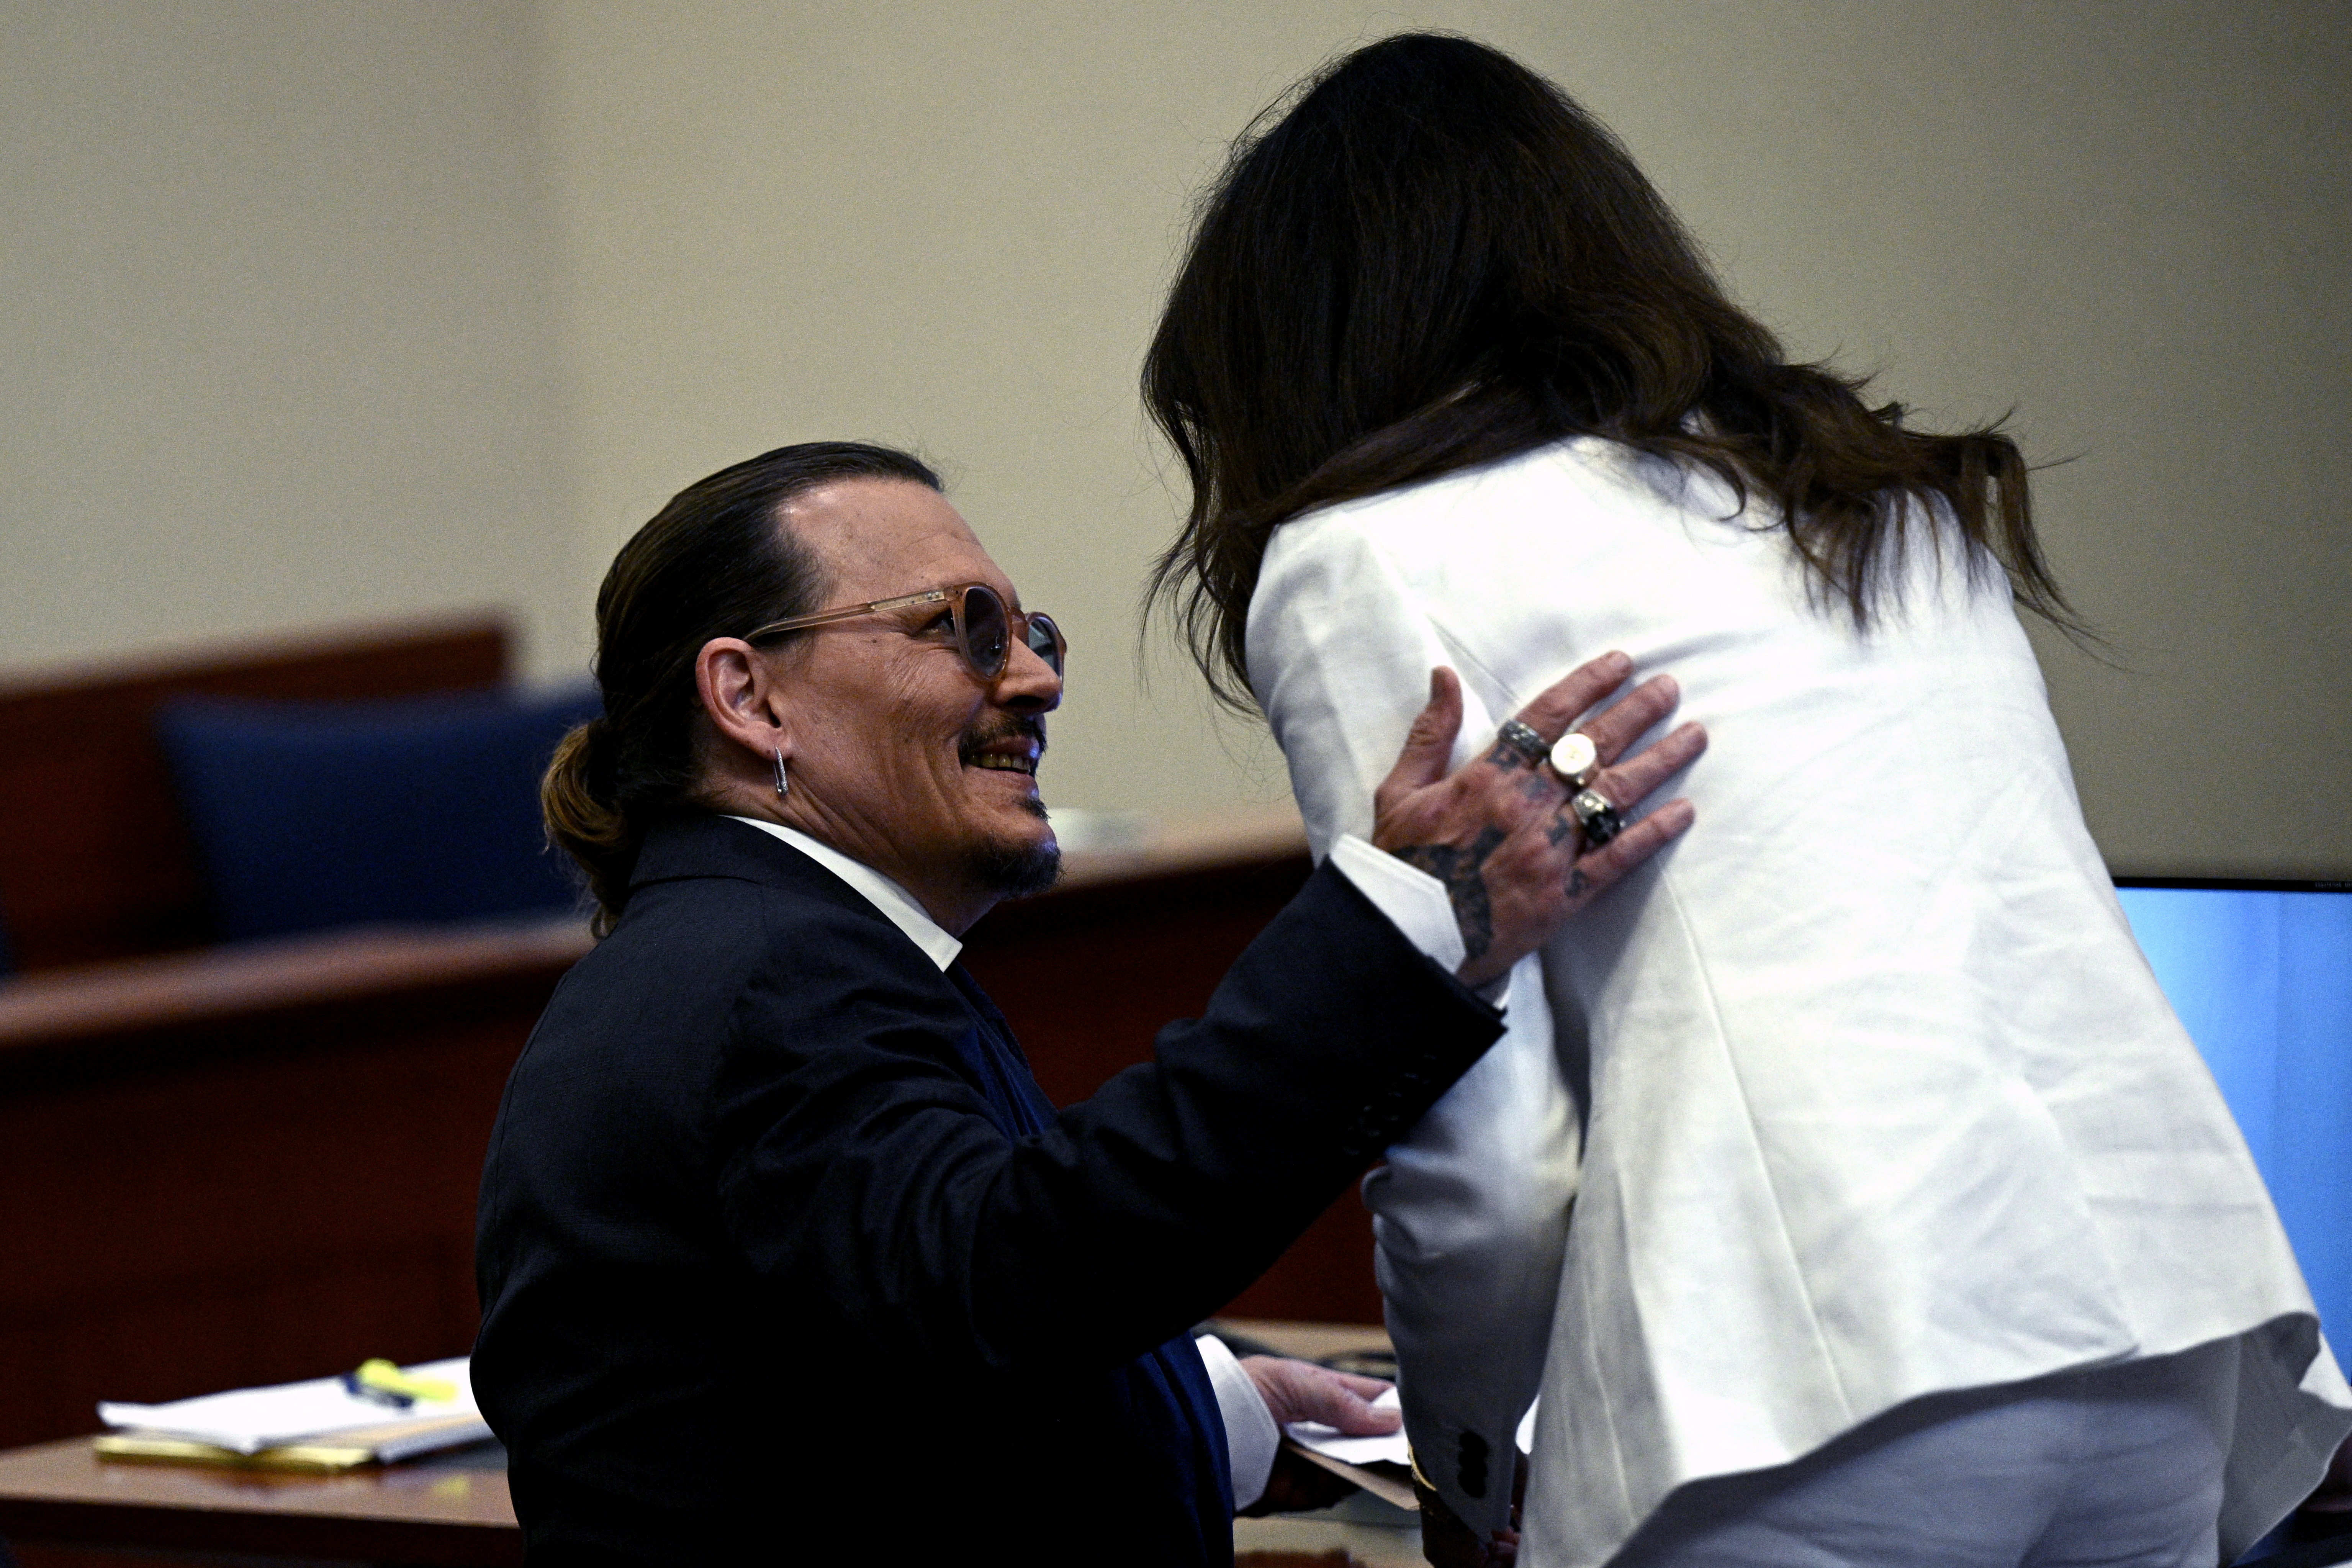 Depp fans have highlighted in several clips the gestures of closeness and complicity between client and litigant (Photo: Reuters)